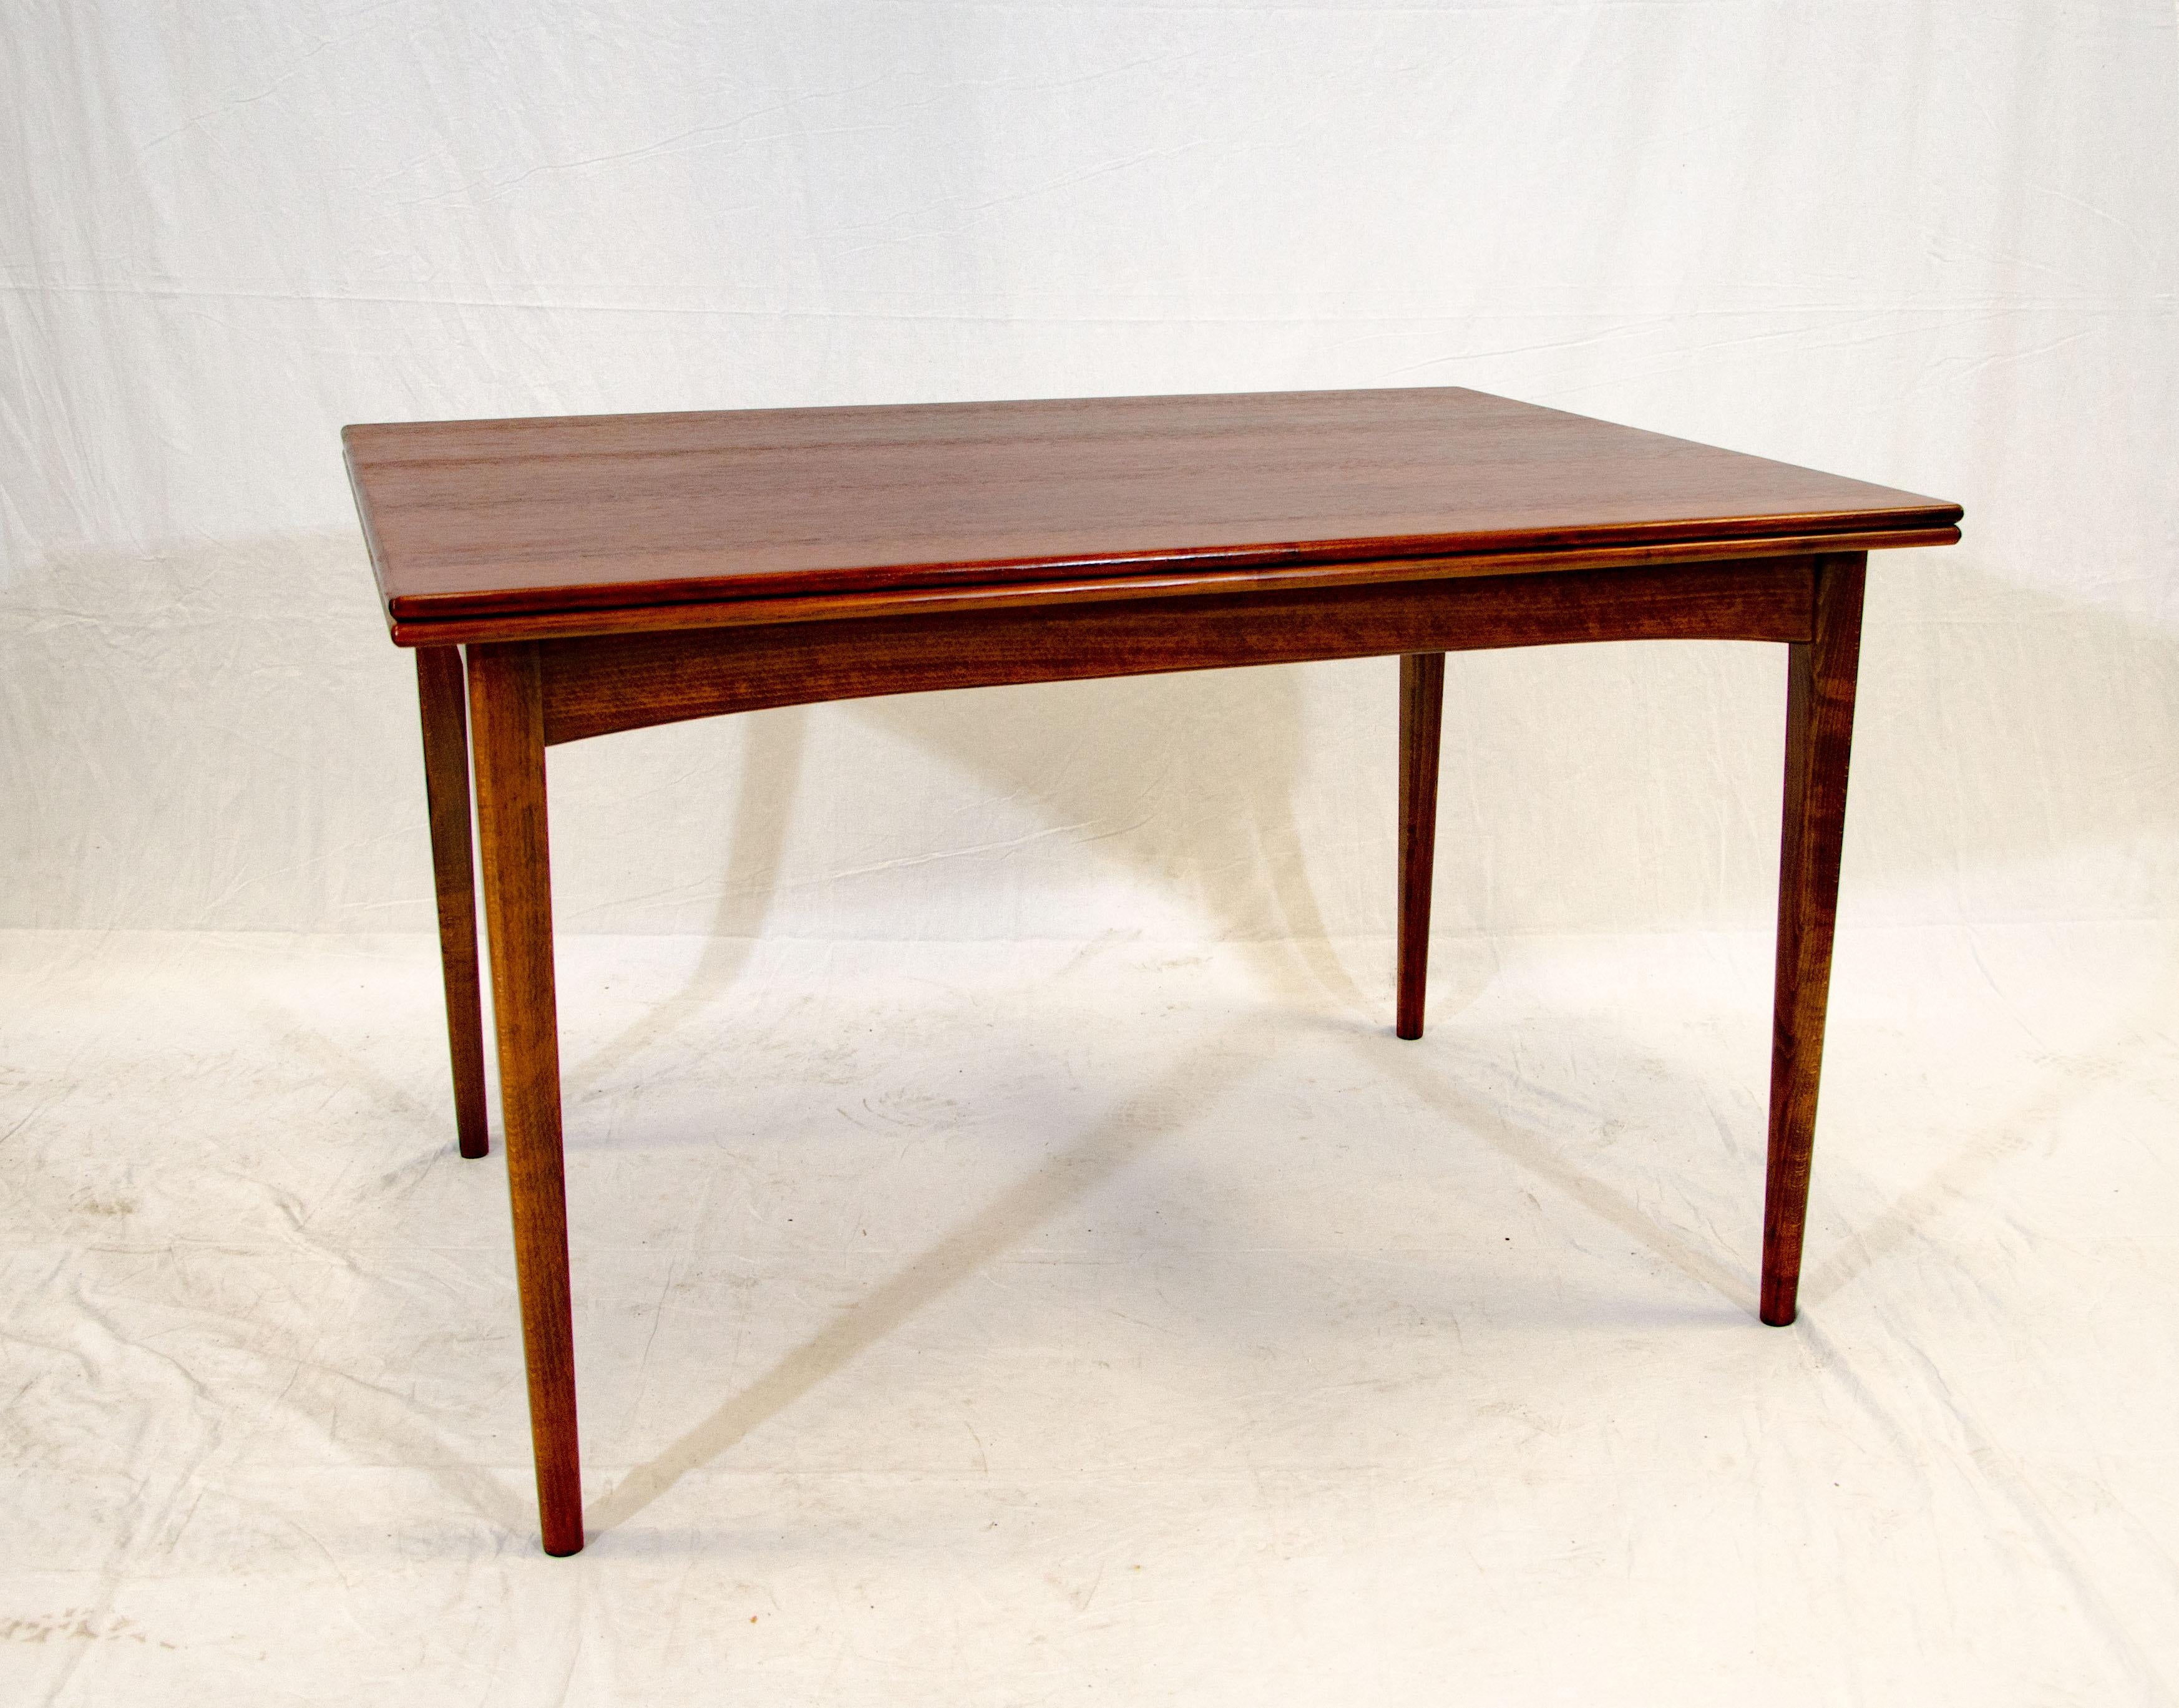 Unusual Dux walnut flip-top dining table from Sweden. The compact size is 47 1/4